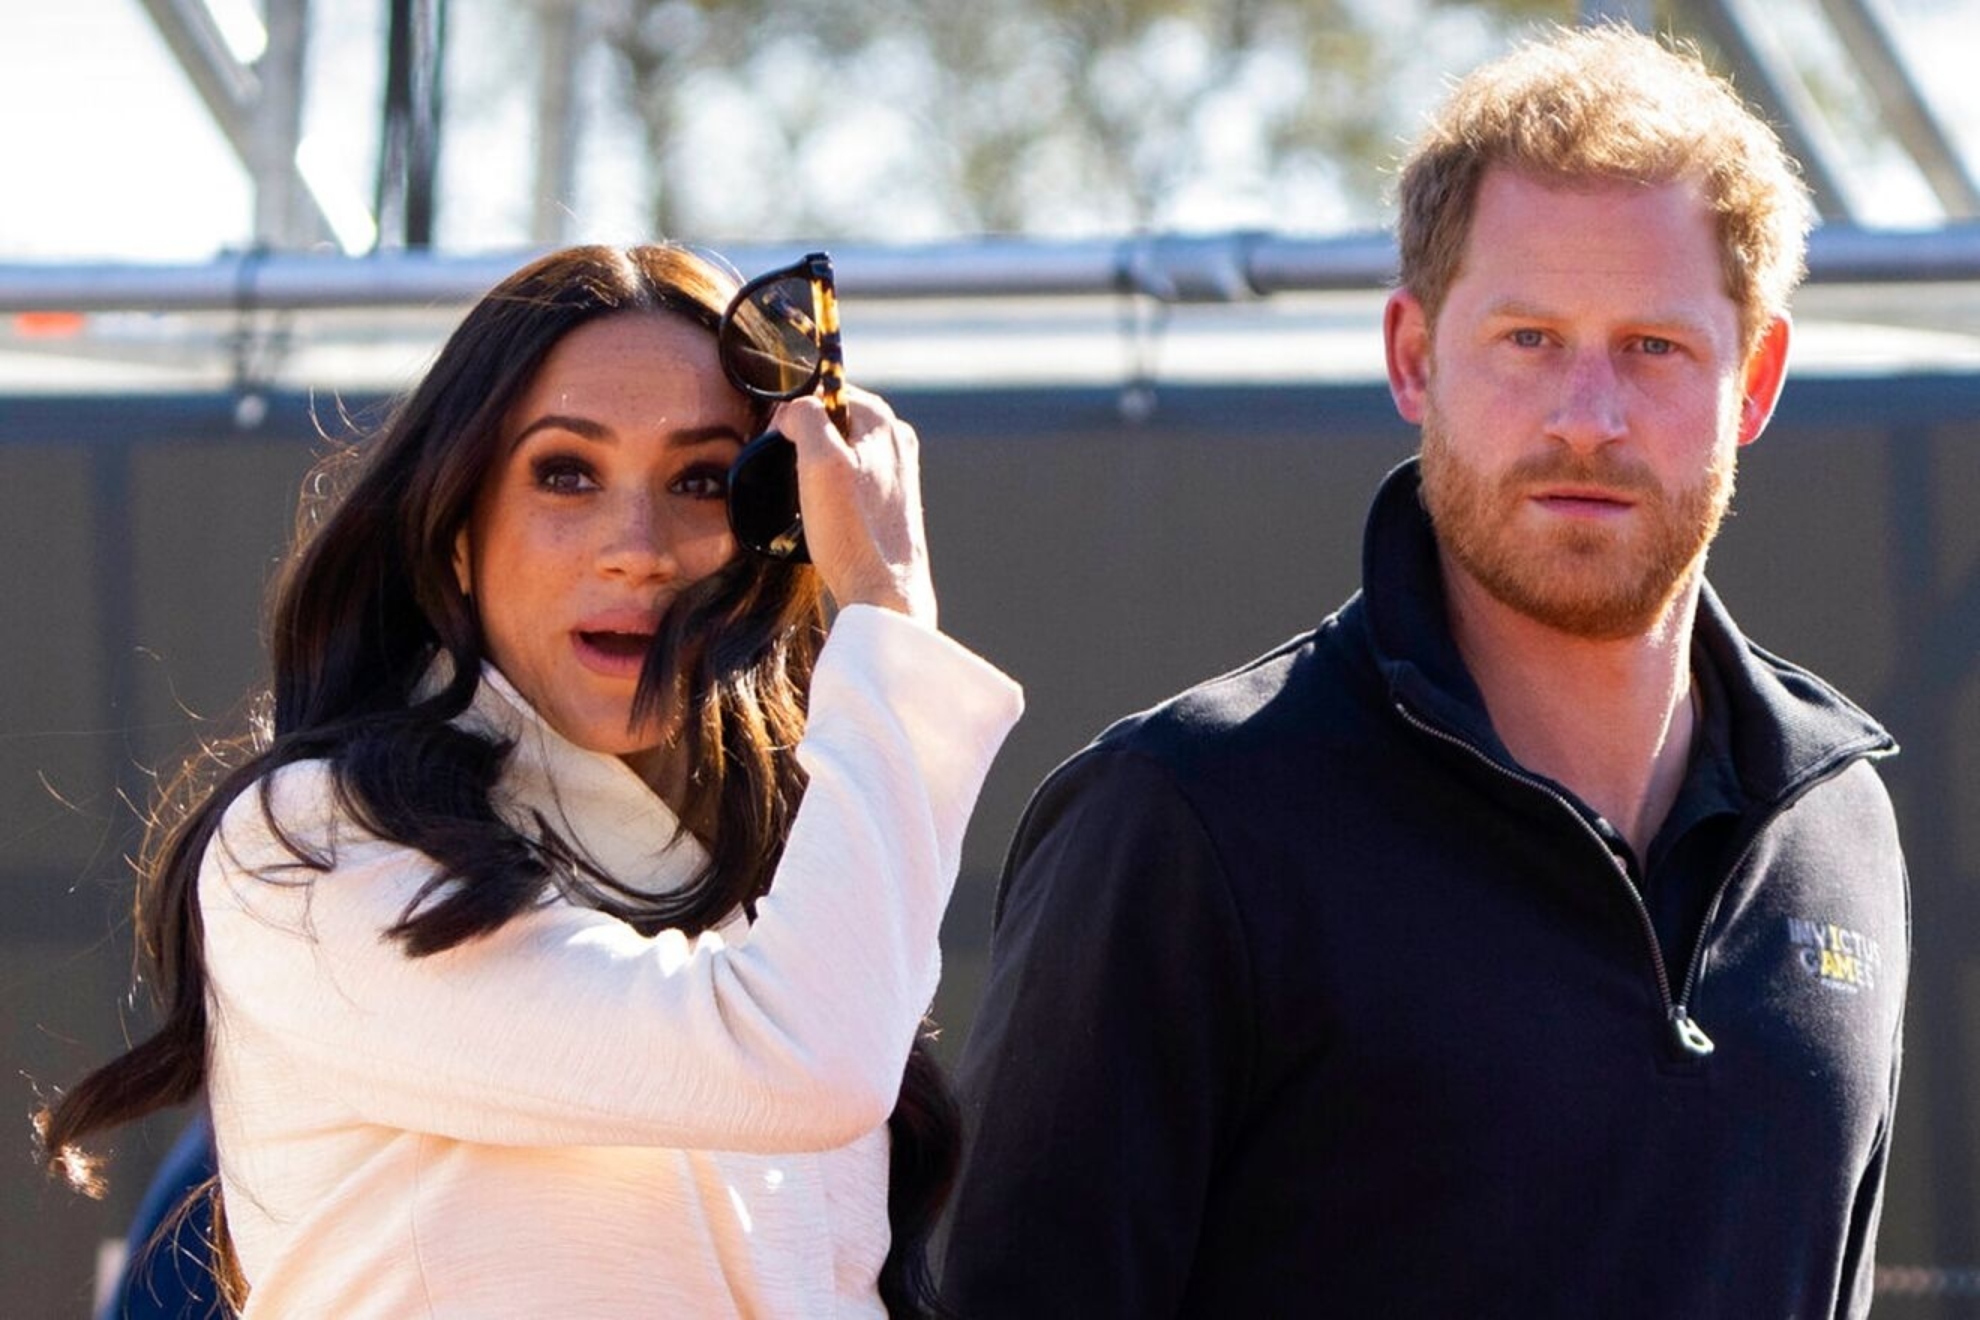 Prince Harry and Meghan Markle return to NYC for first time since car chase